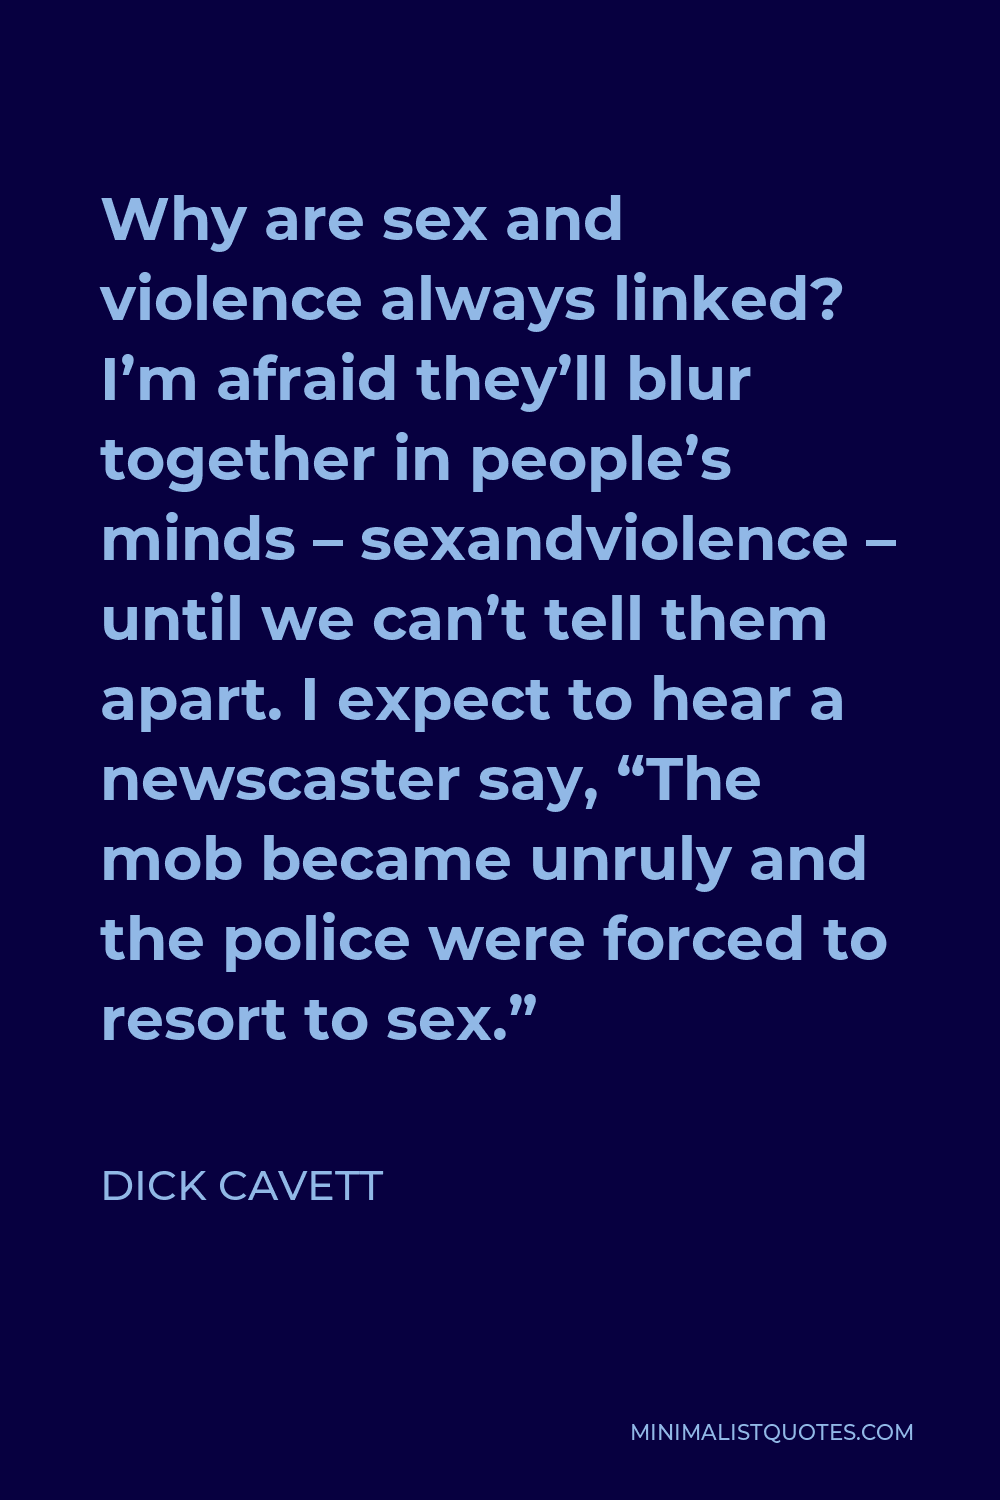 Dick Cavett Quote - Why are sex and violence always linked? I’m afraid they’ll blur together in people’s minds – sexandviolence – until we can’t tell them apart. I expect to hear a newscaster say, “The mob became unruly and the police were forced to resort to sex.”